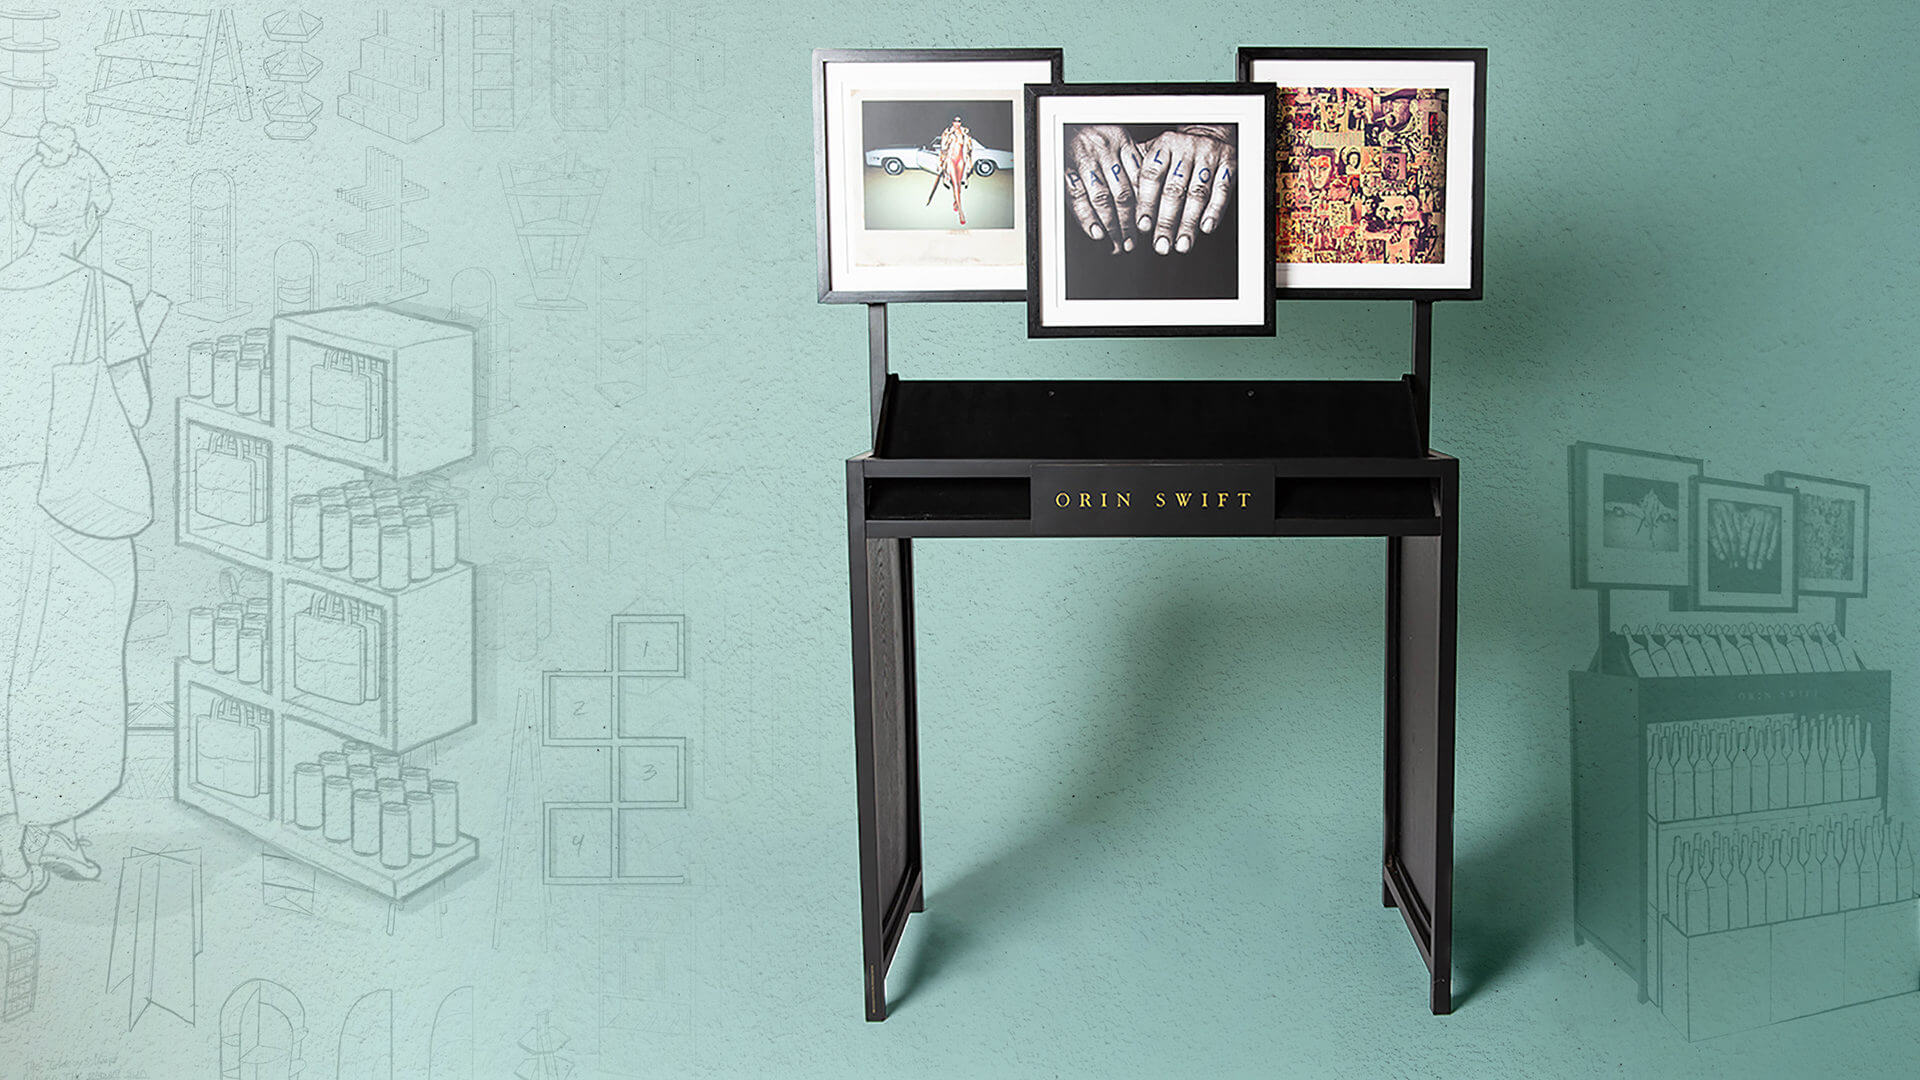 Orin Swift display featuring 3 frames images. Teal background with display illustrations.